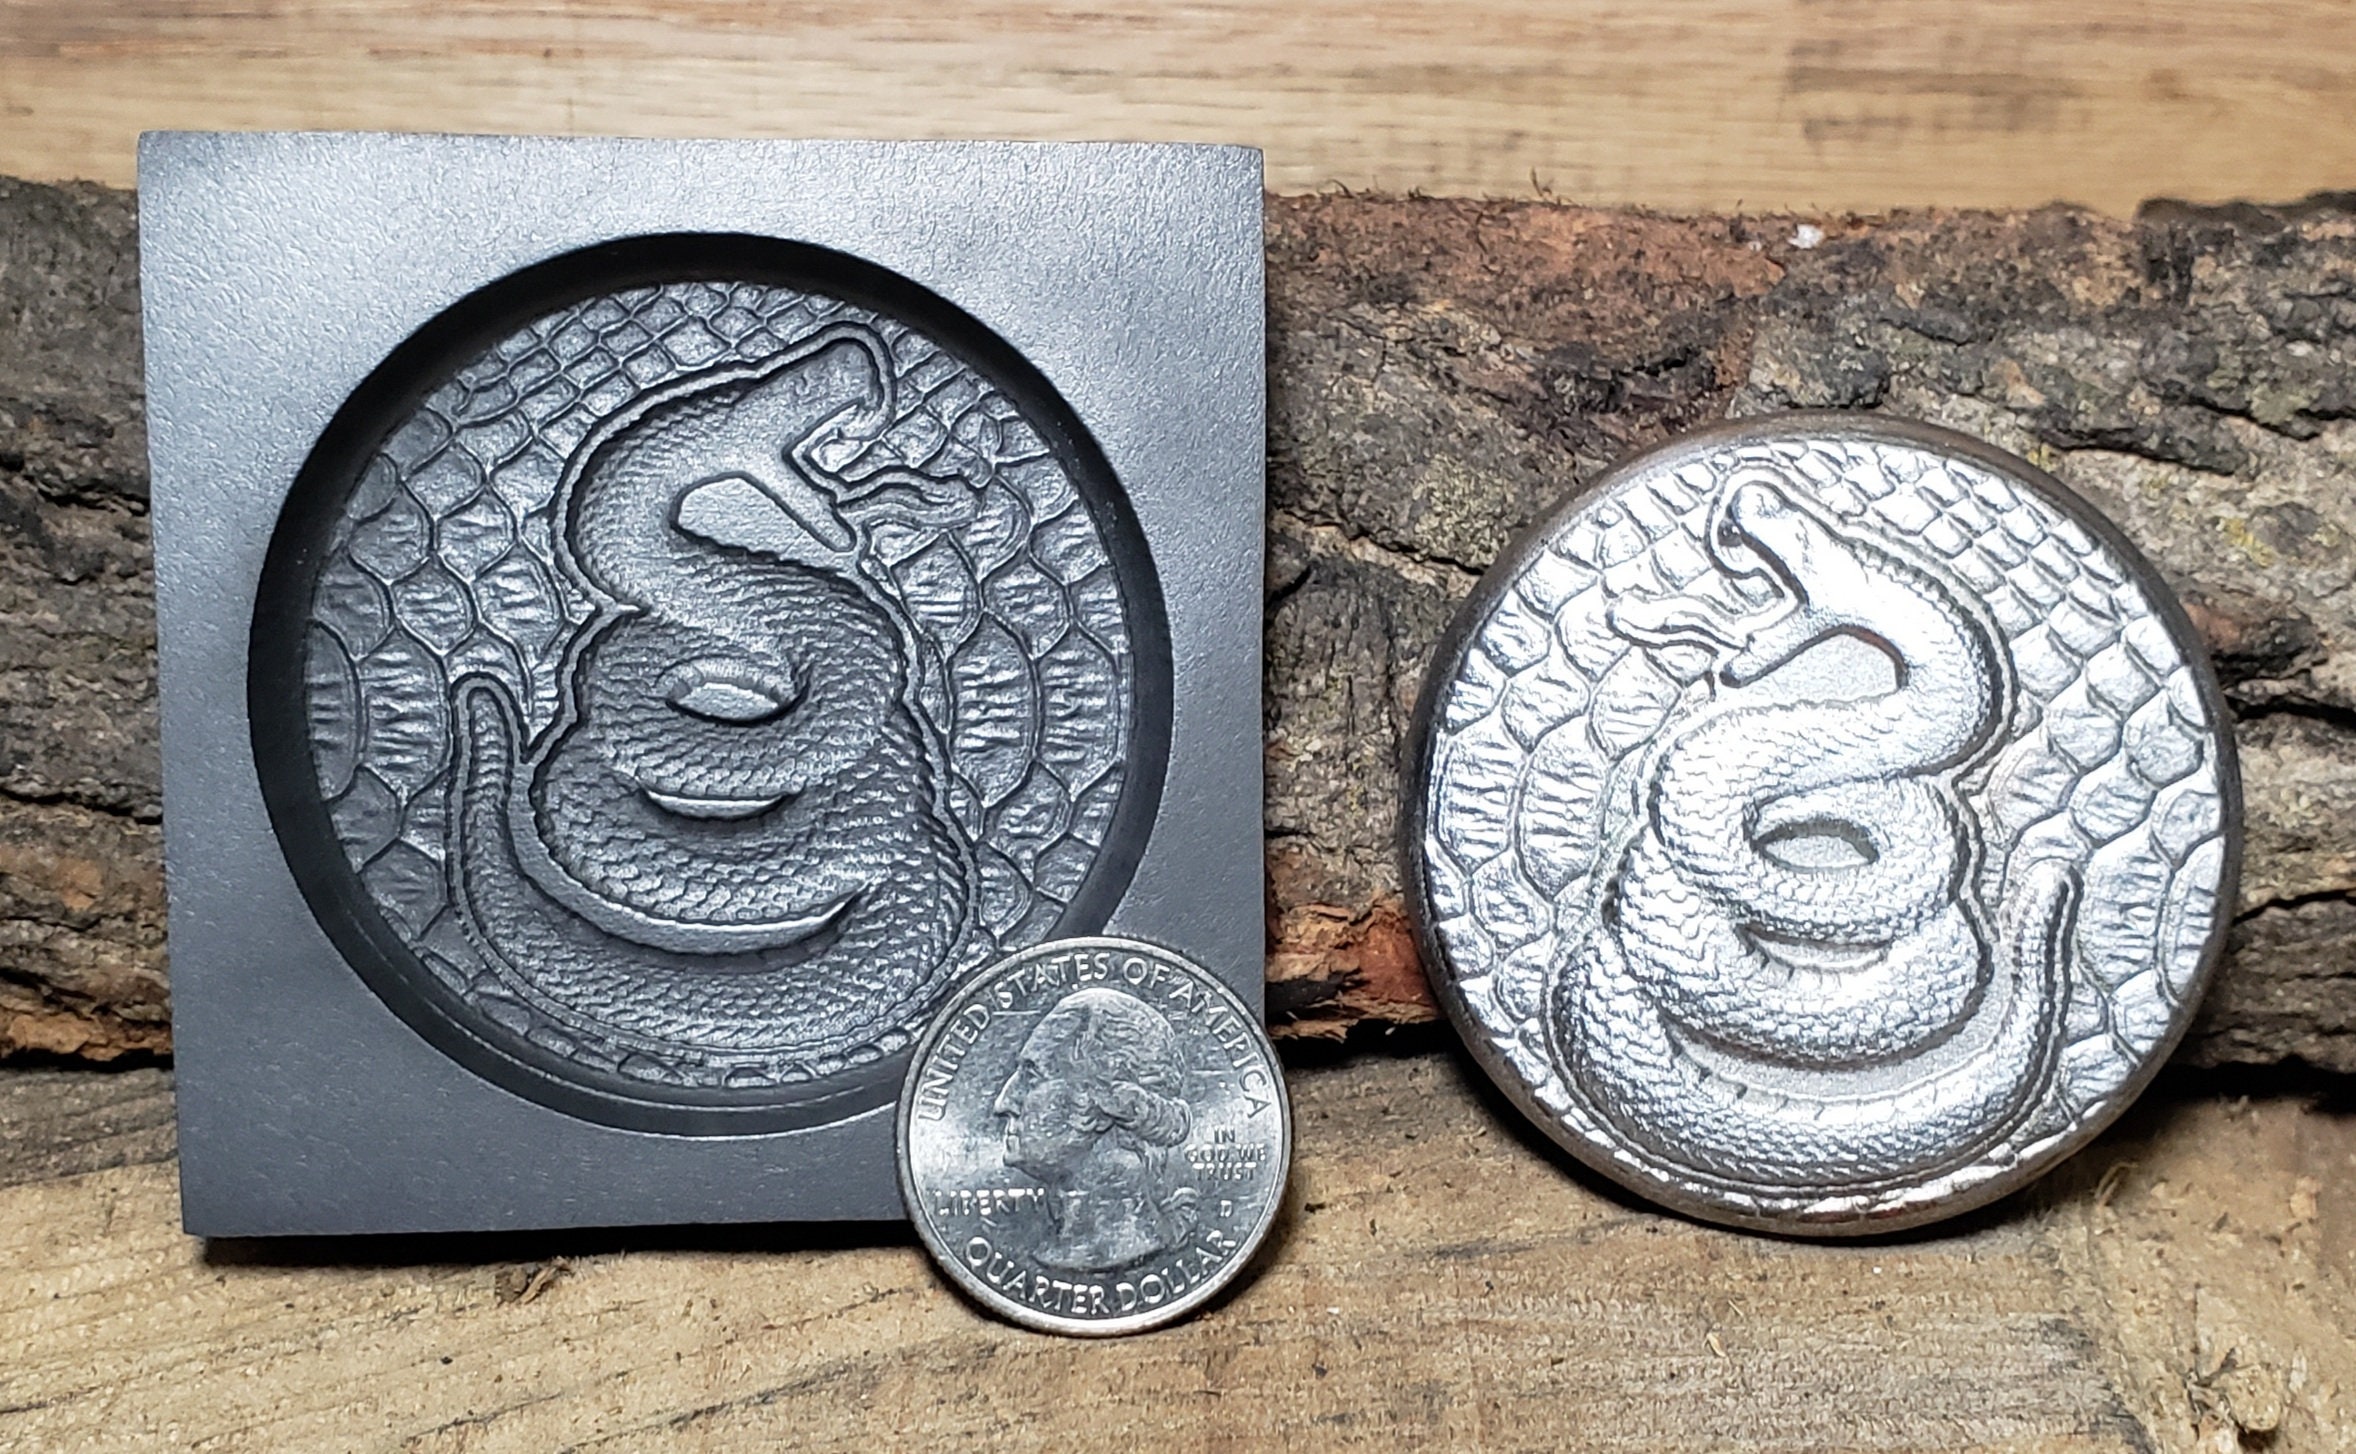 Viking Raven Penny Graphite mold for 2 sided coin - Cast your own